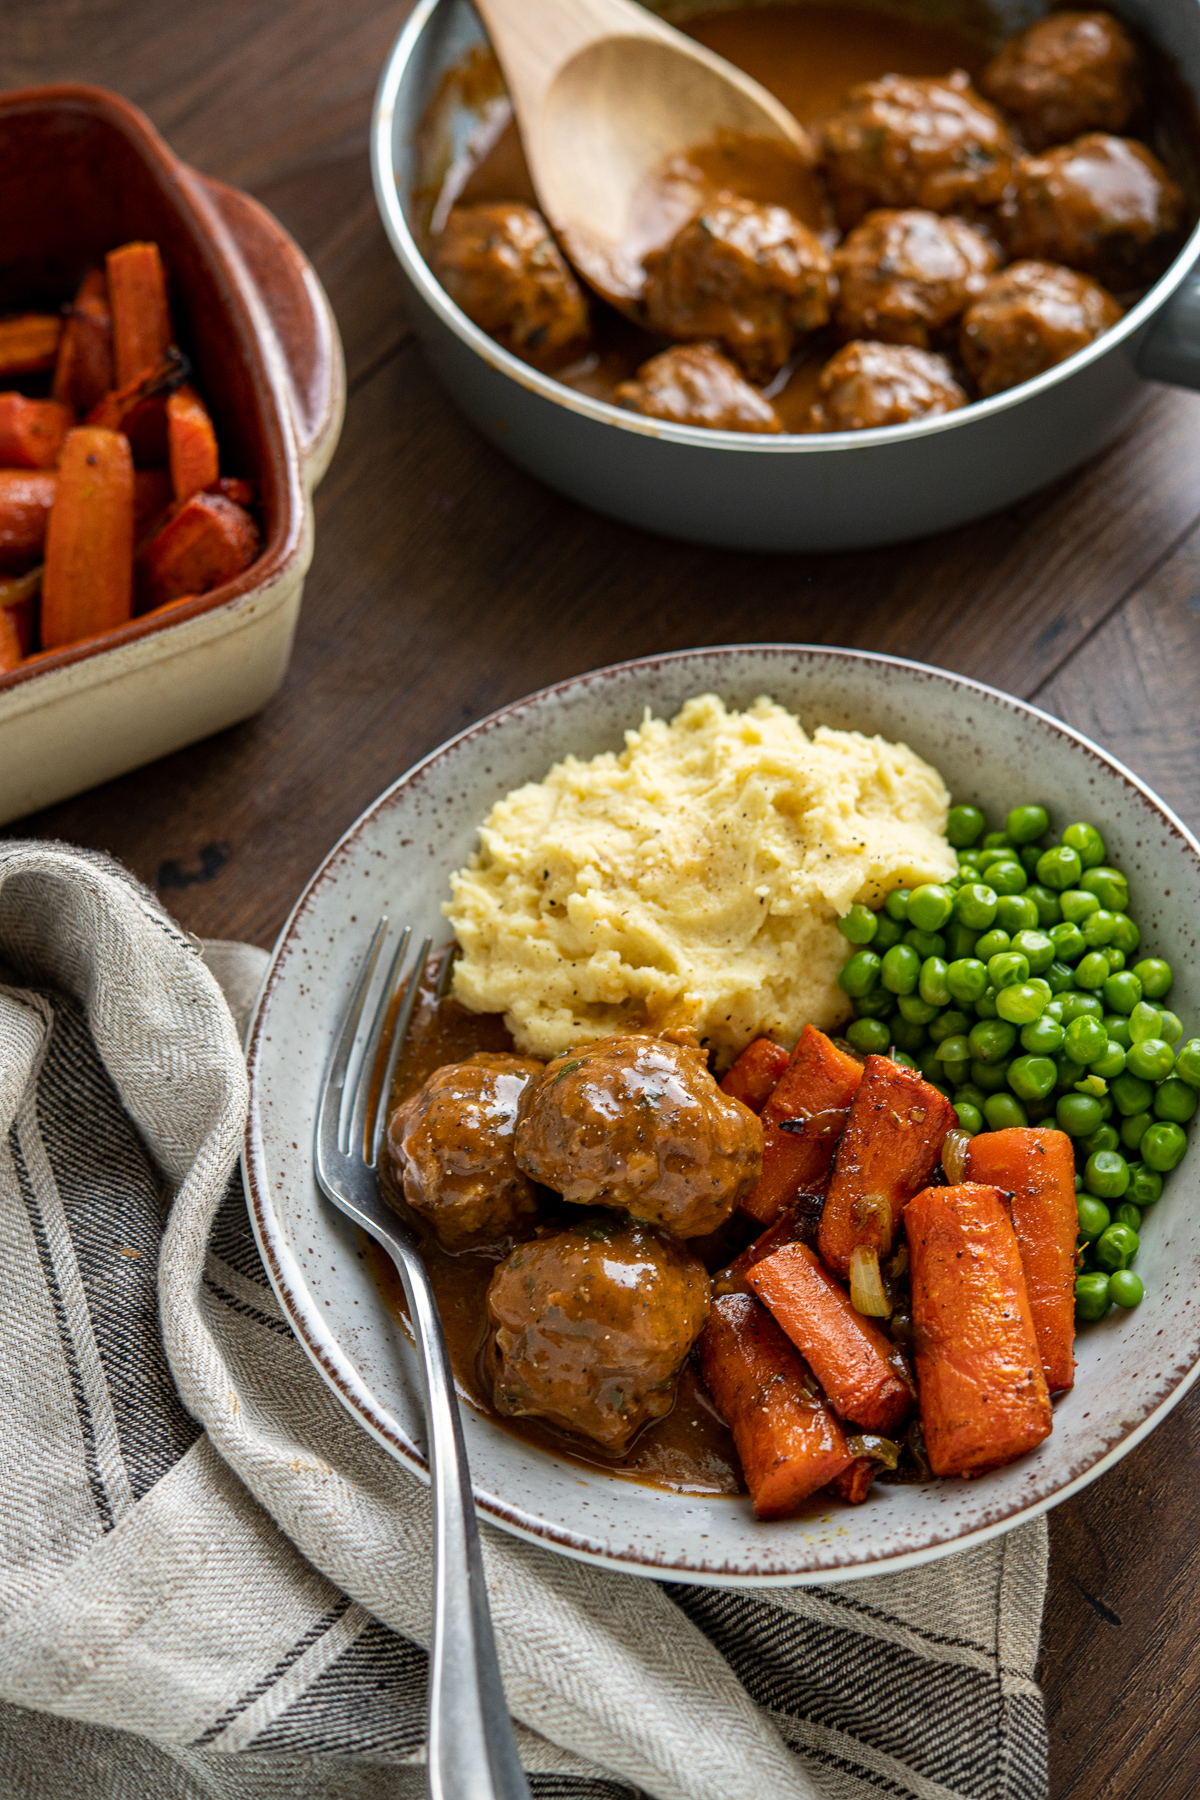 Lamb Meatballs with Mint Gravy in a grey and brown bowl with carrots, onion, peas and mashed potatoes with fork place in the bowl on the left